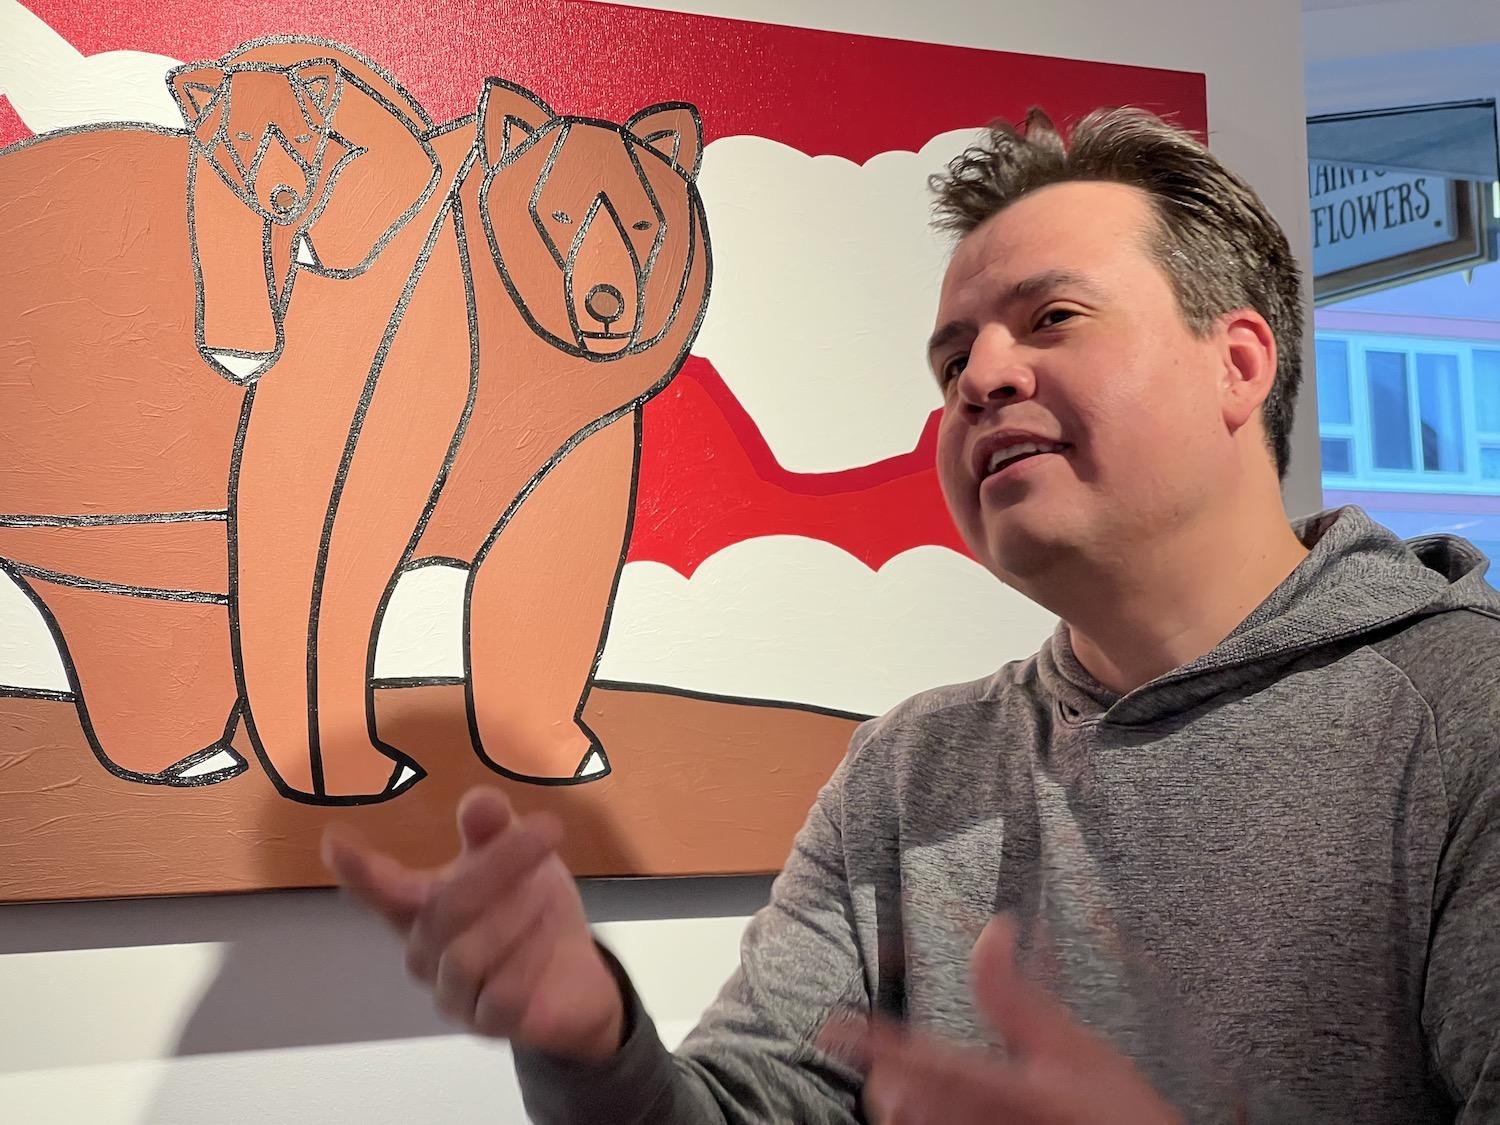 Jason Carter, an Indigenous sculptor and painter, is shown at the Carter-Ryan Gallery in Banff.